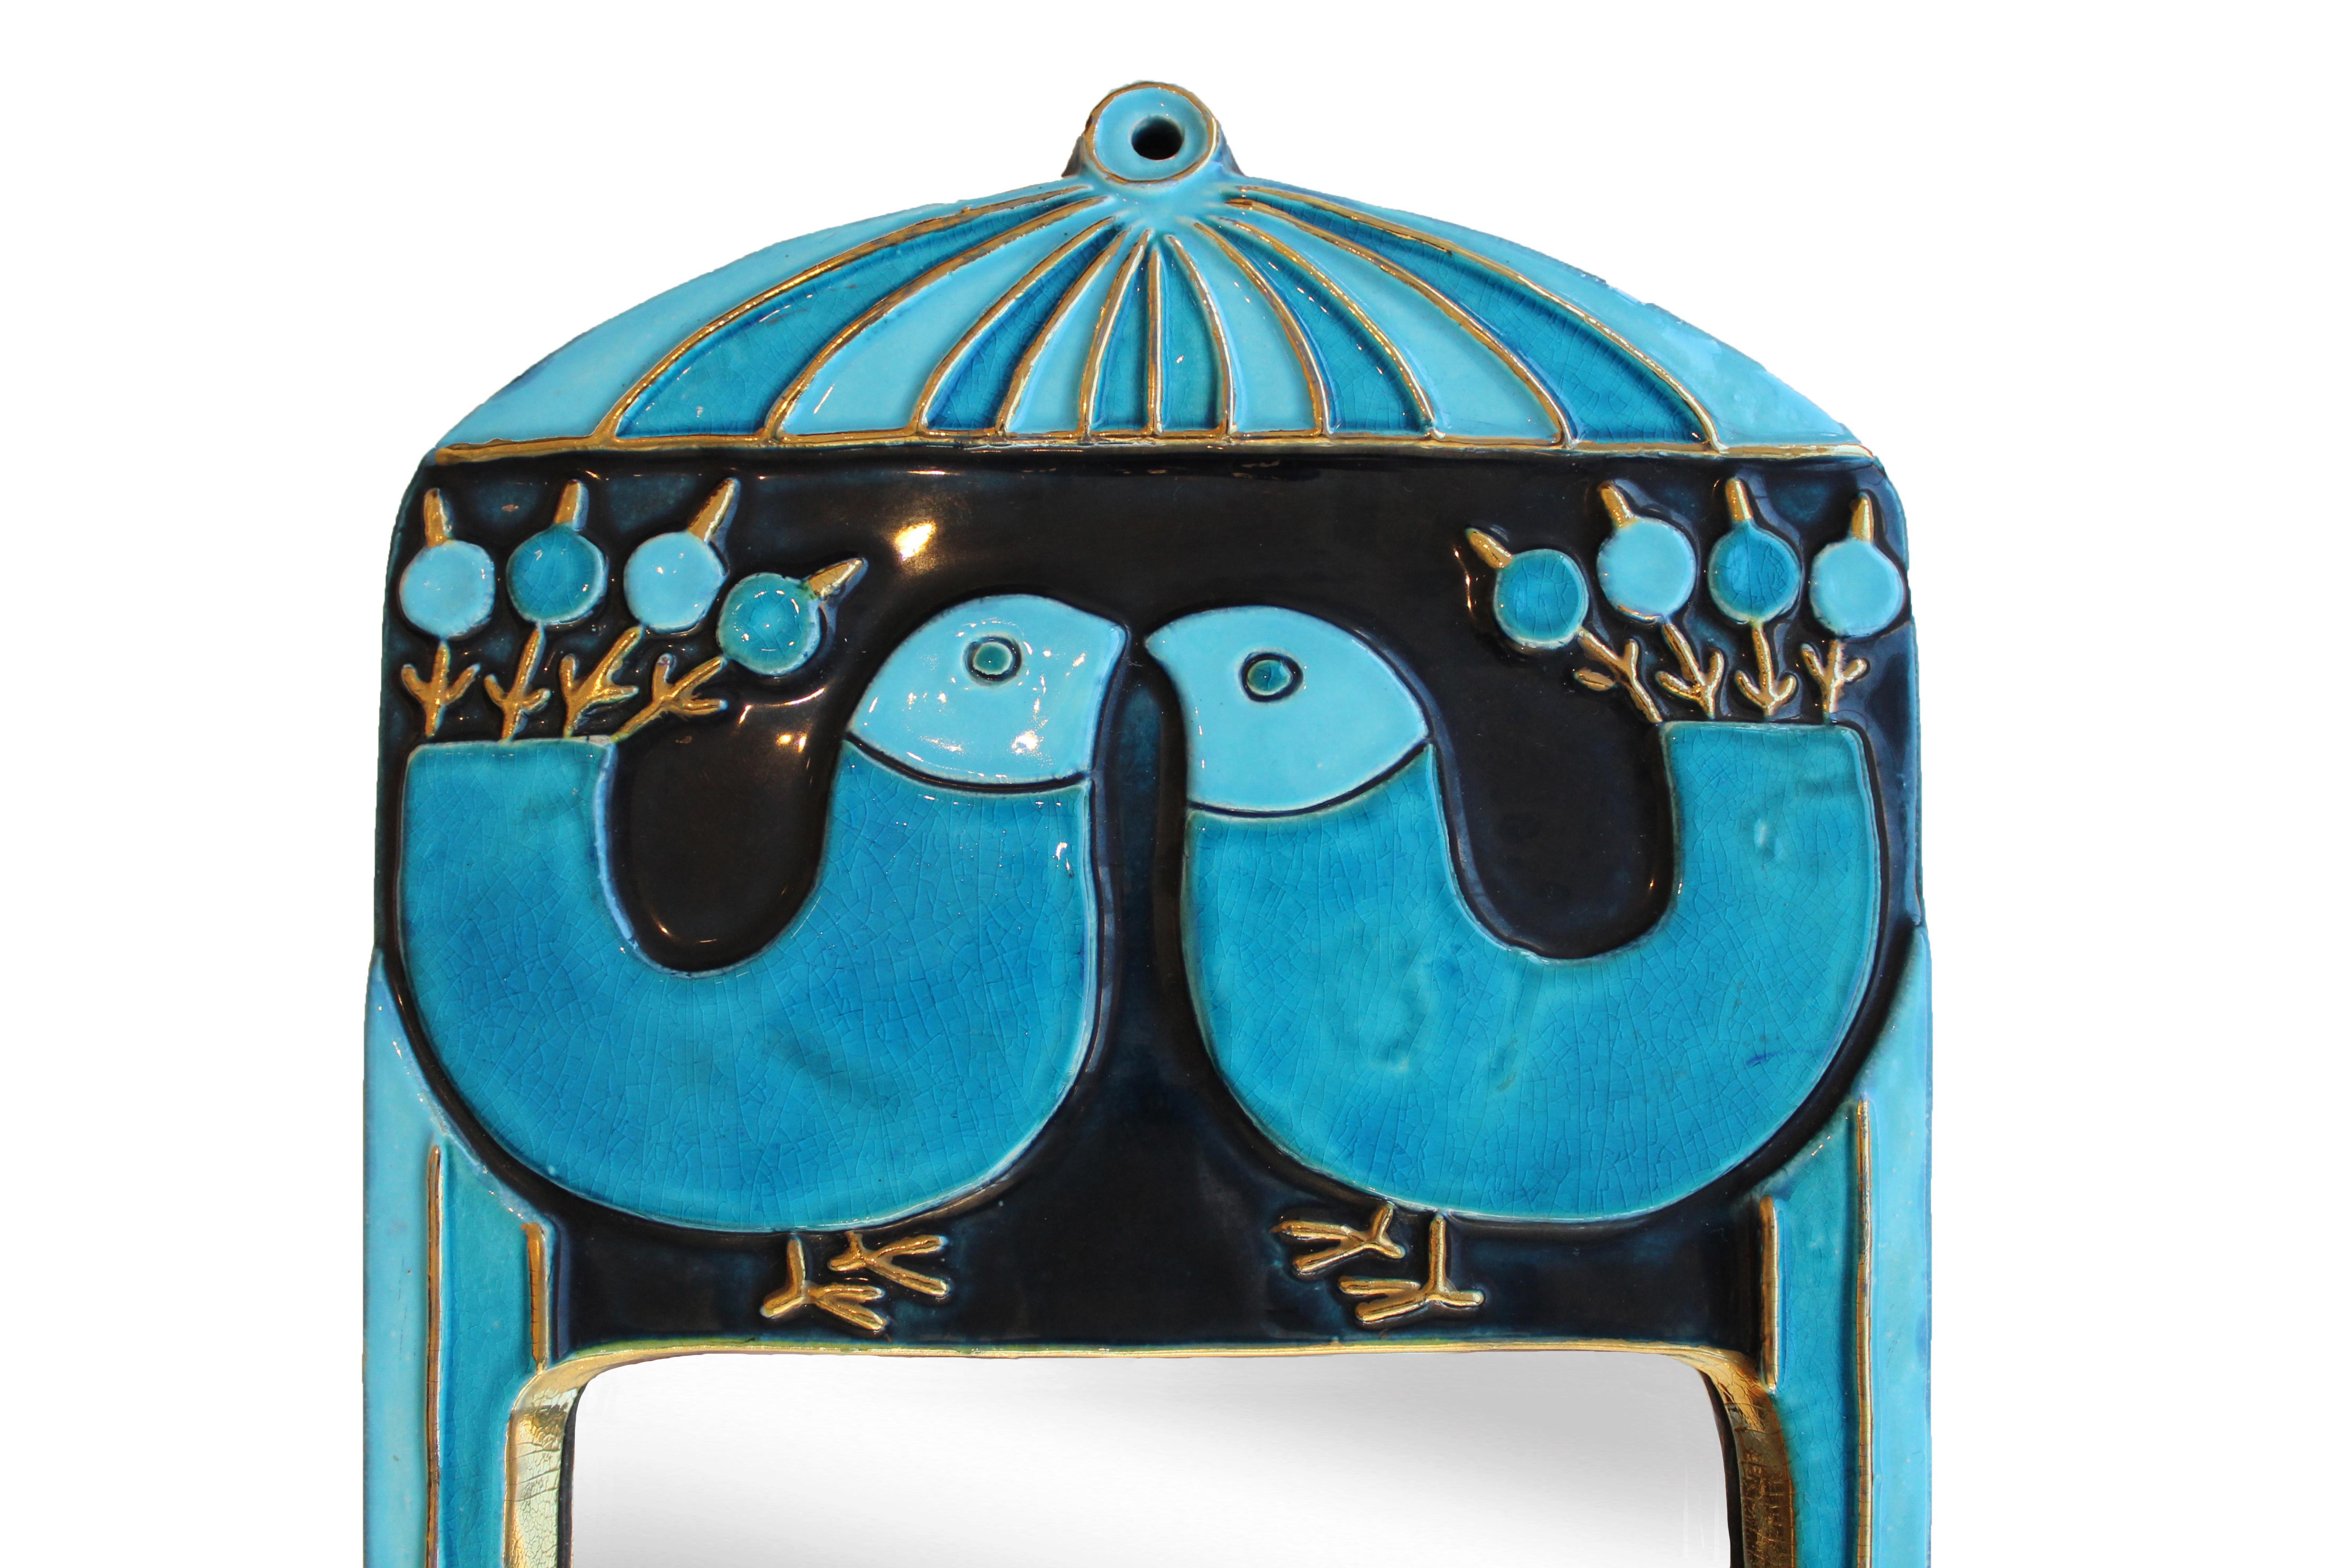 Mithé Espelt ceramic mirror, circa 1960, France.
Glazed embossed earthenware.
Crackled gold and crystallized blue glass.
Iconic mirror decorated with birds.
Original felt backing.
Circa 1960, France.
Very good condition.
The life of Mithé